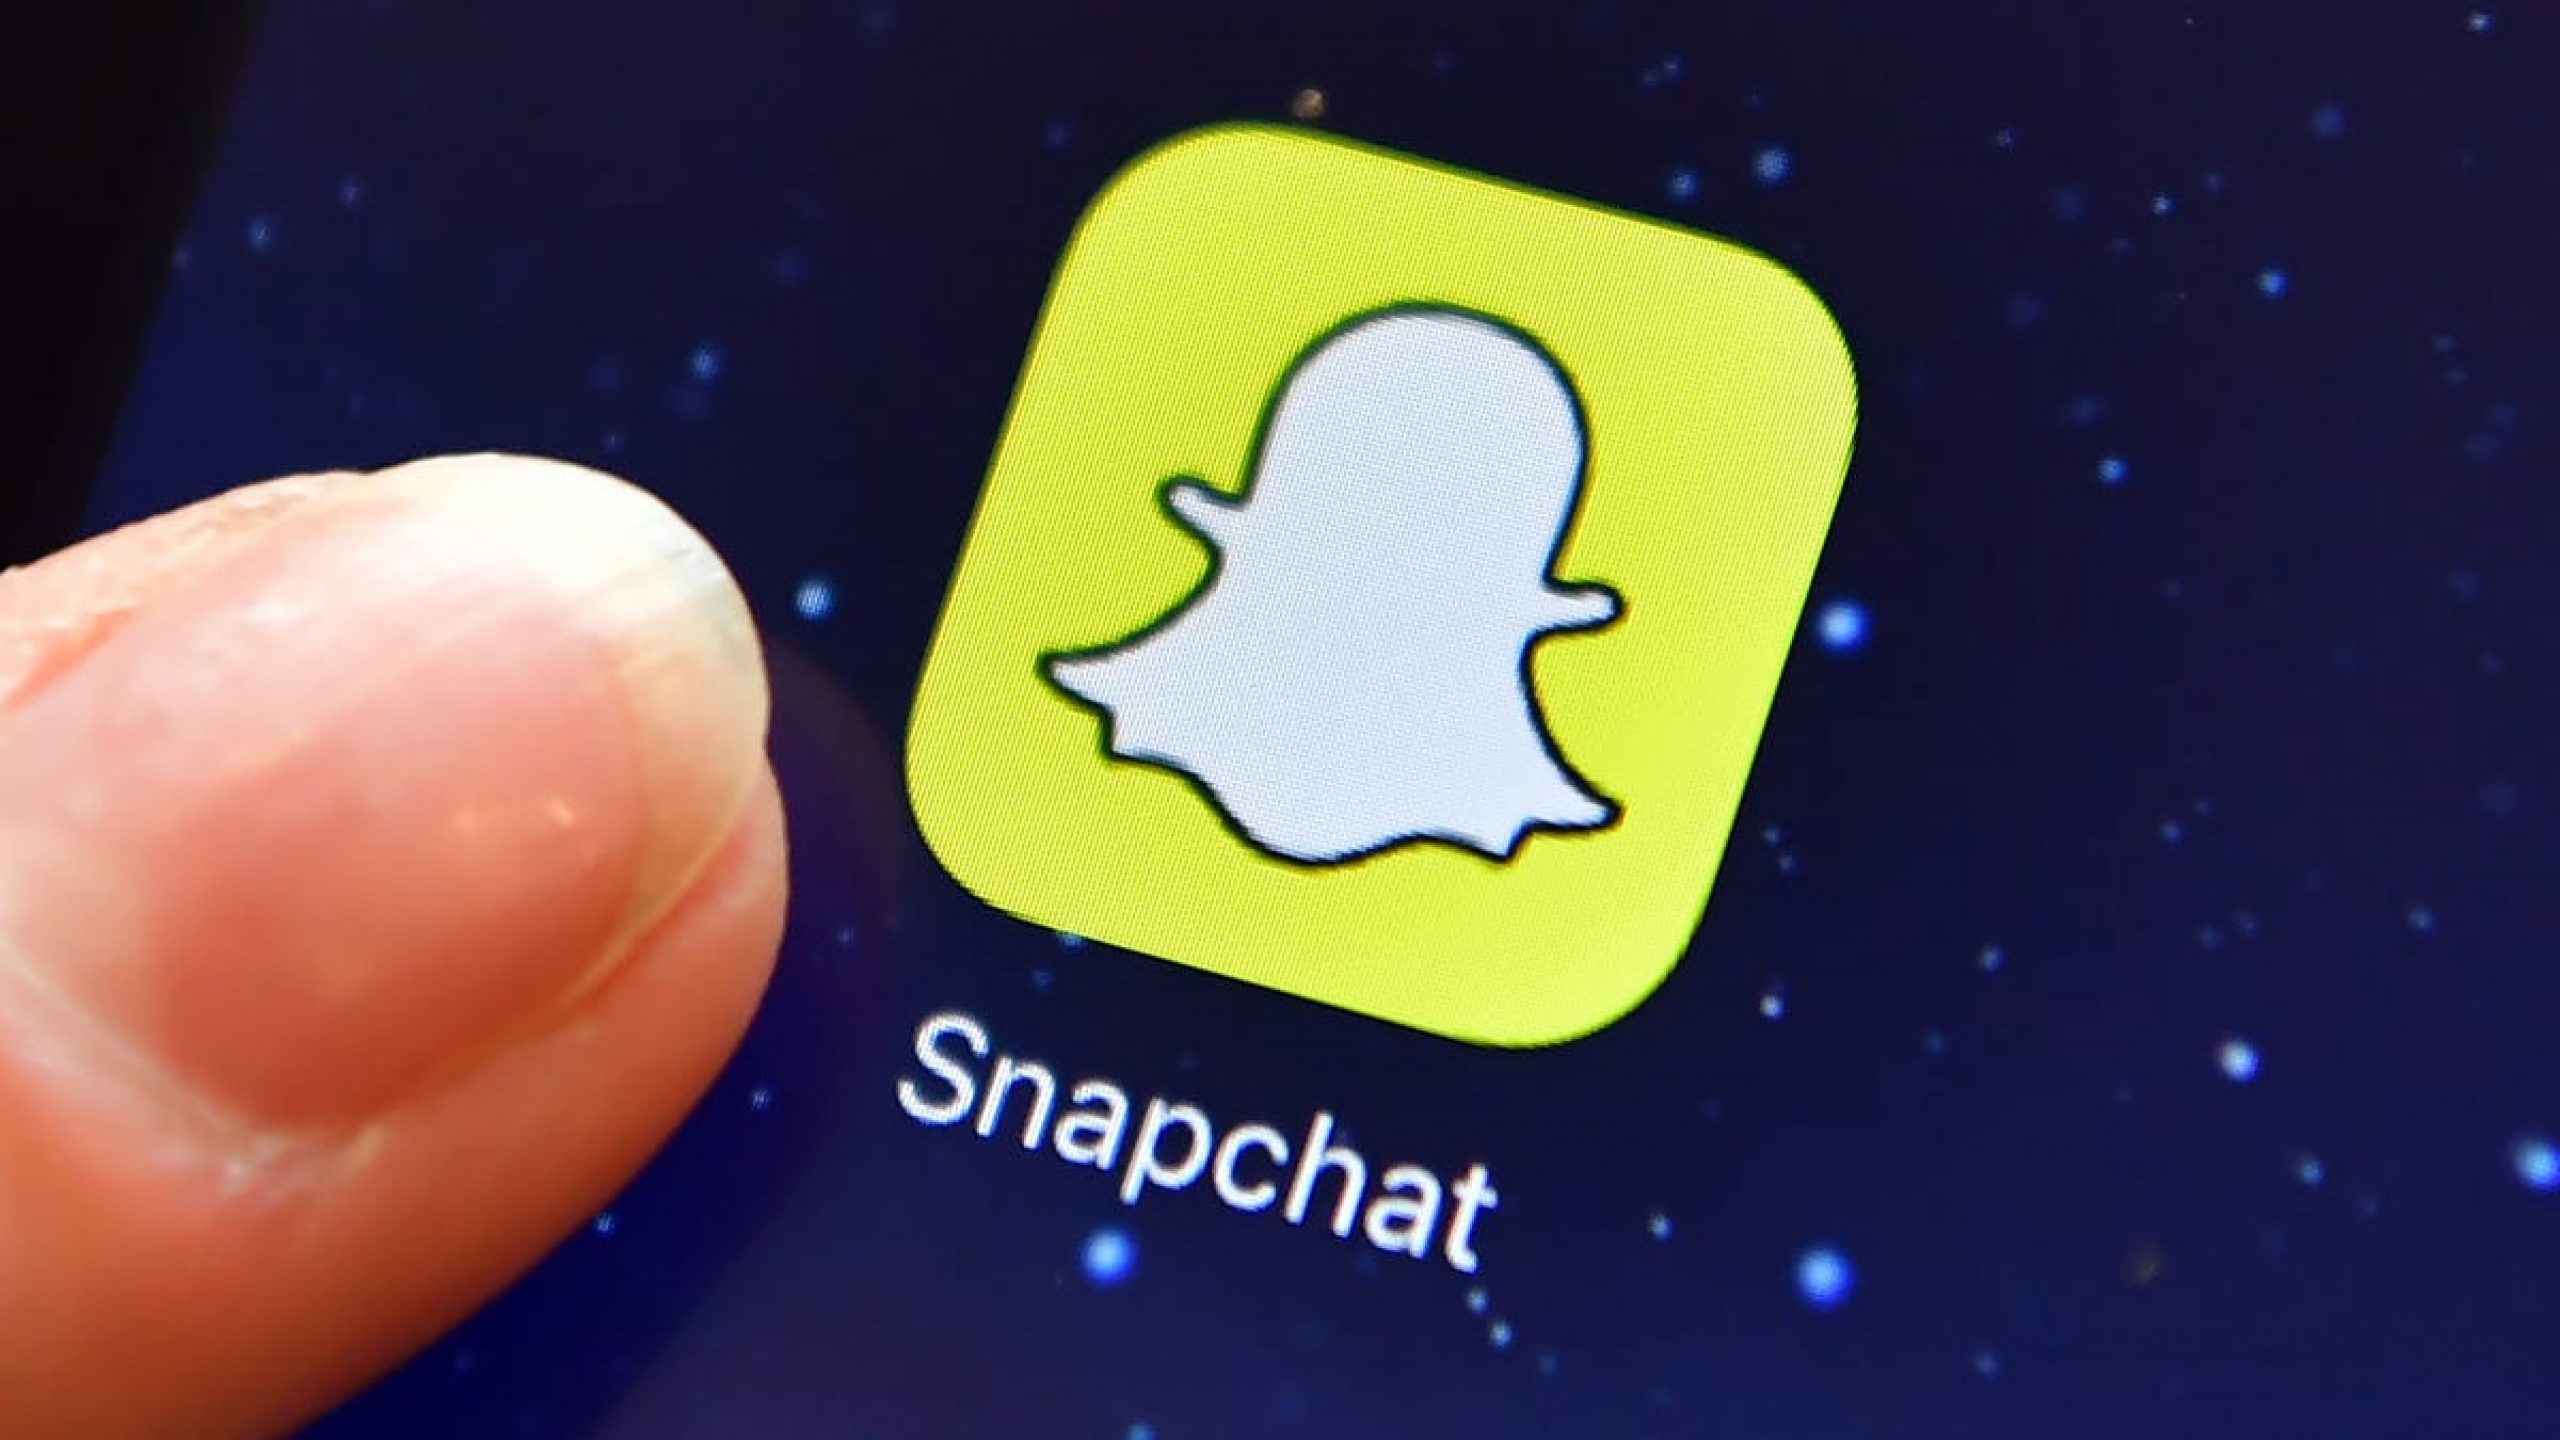 Snapchat Says App Will Stop Crashing If You Download the Update